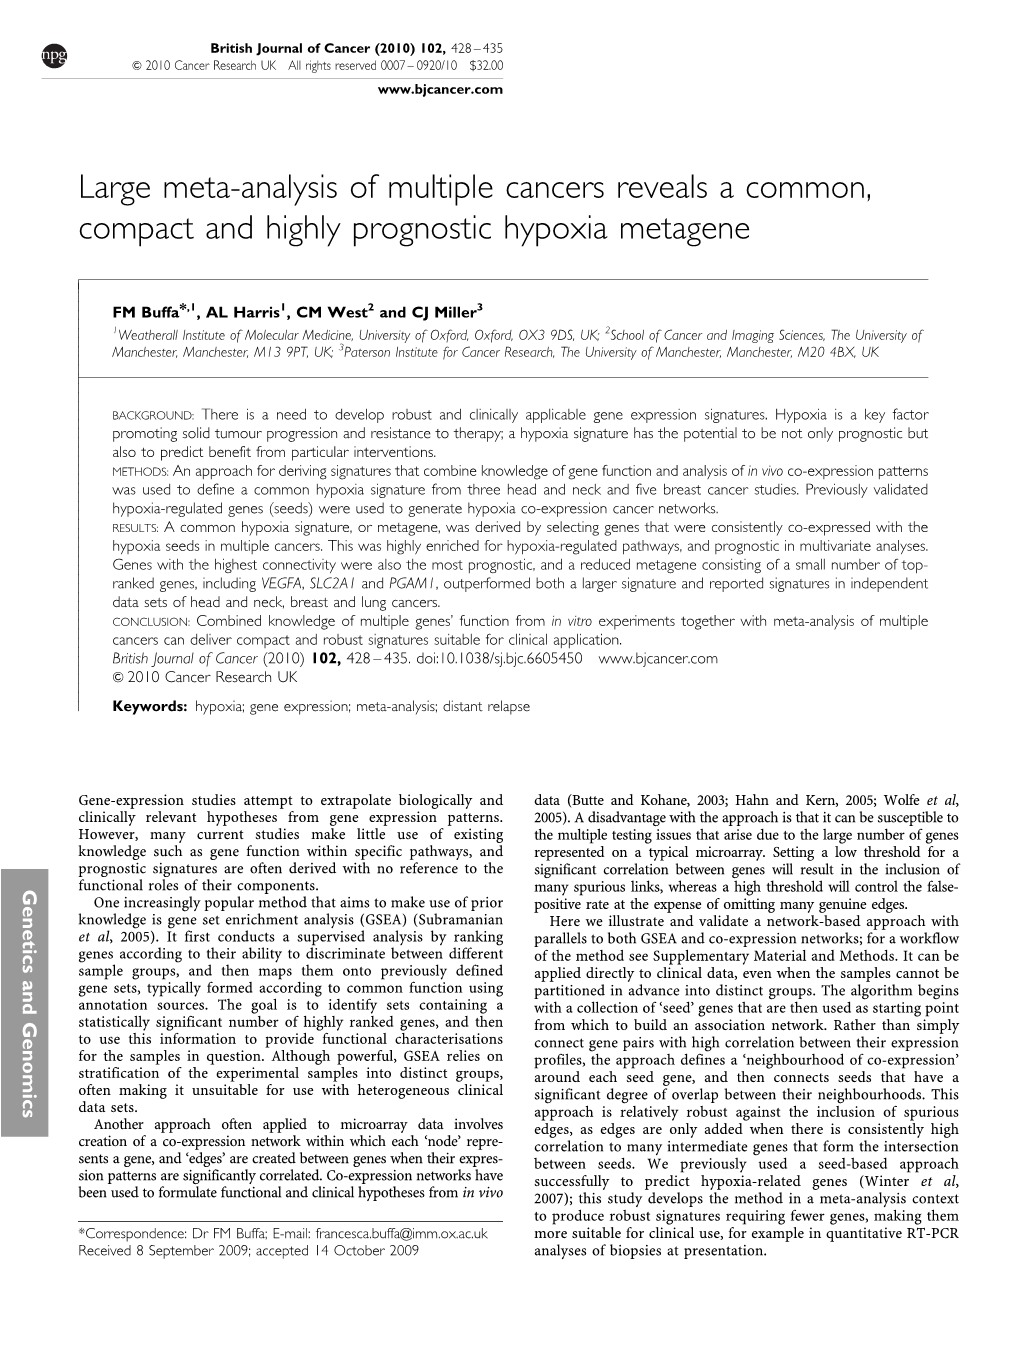 Large Meta-Analysis of Multiple Cancers Reveals a Common, Compact and Highly Prognostic Hypoxia Metagene